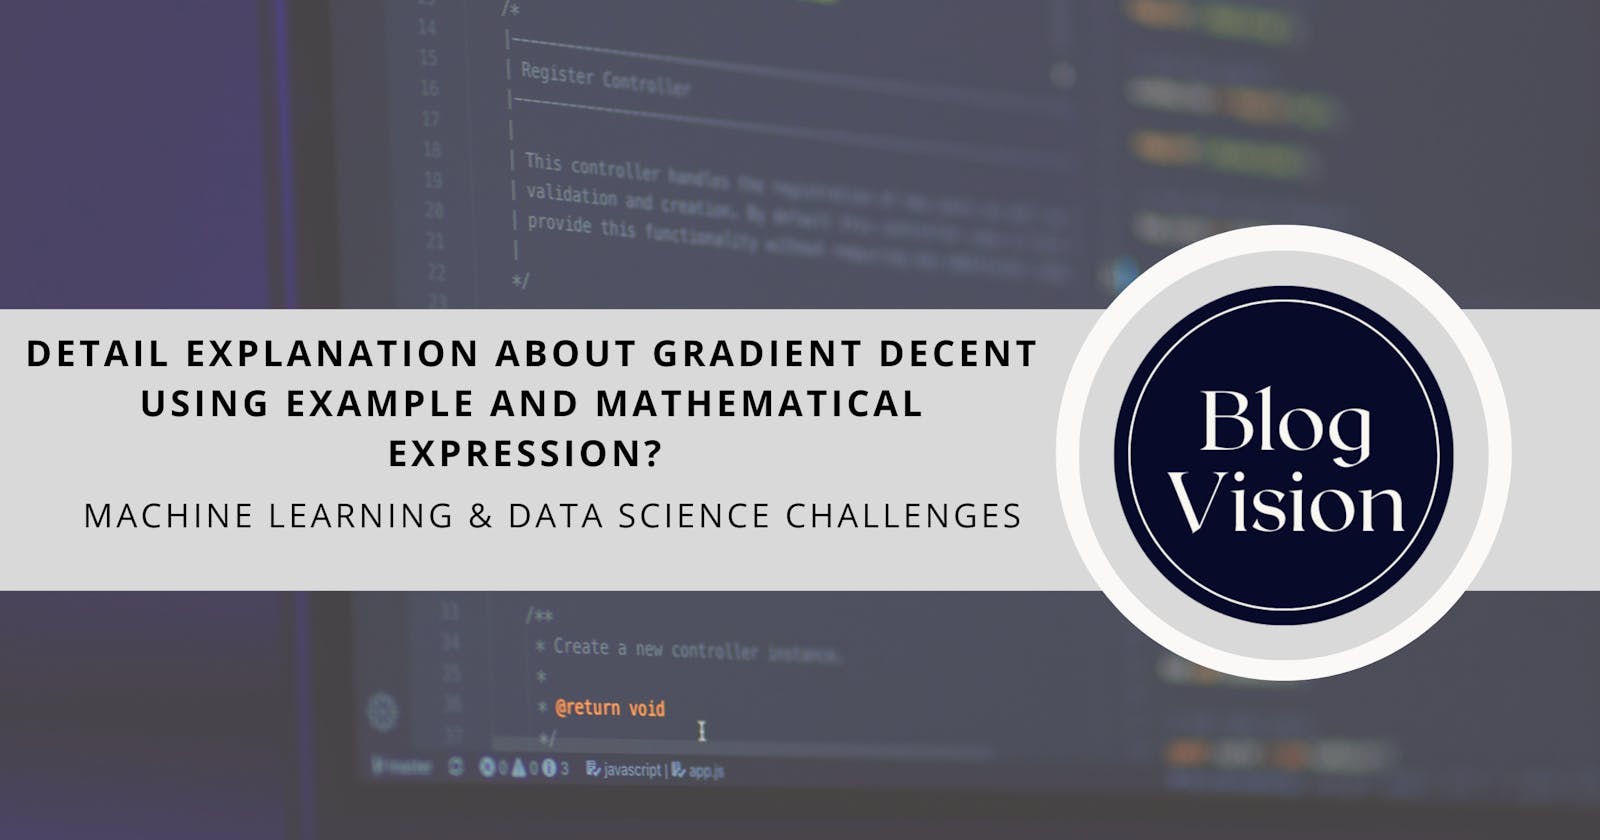 #57 Machine Learning & Data Science Challenge 57